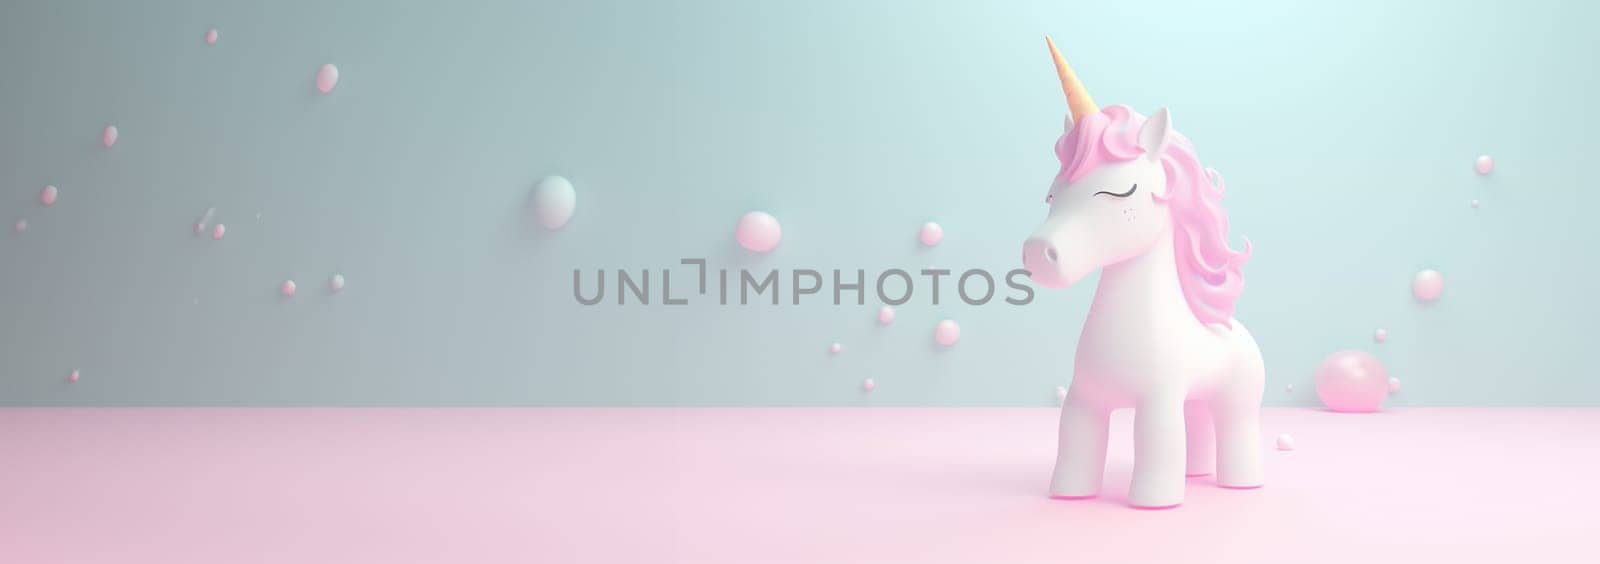 Banner Cute unicorn pastel colored background. Magic fairy tale character unicorn 3d illustration for girls. Magic fairy tale unicorn print for clothes, stationery, books, goods. Toy Unicorn 3D character banner, background. Copy space by Annebel146